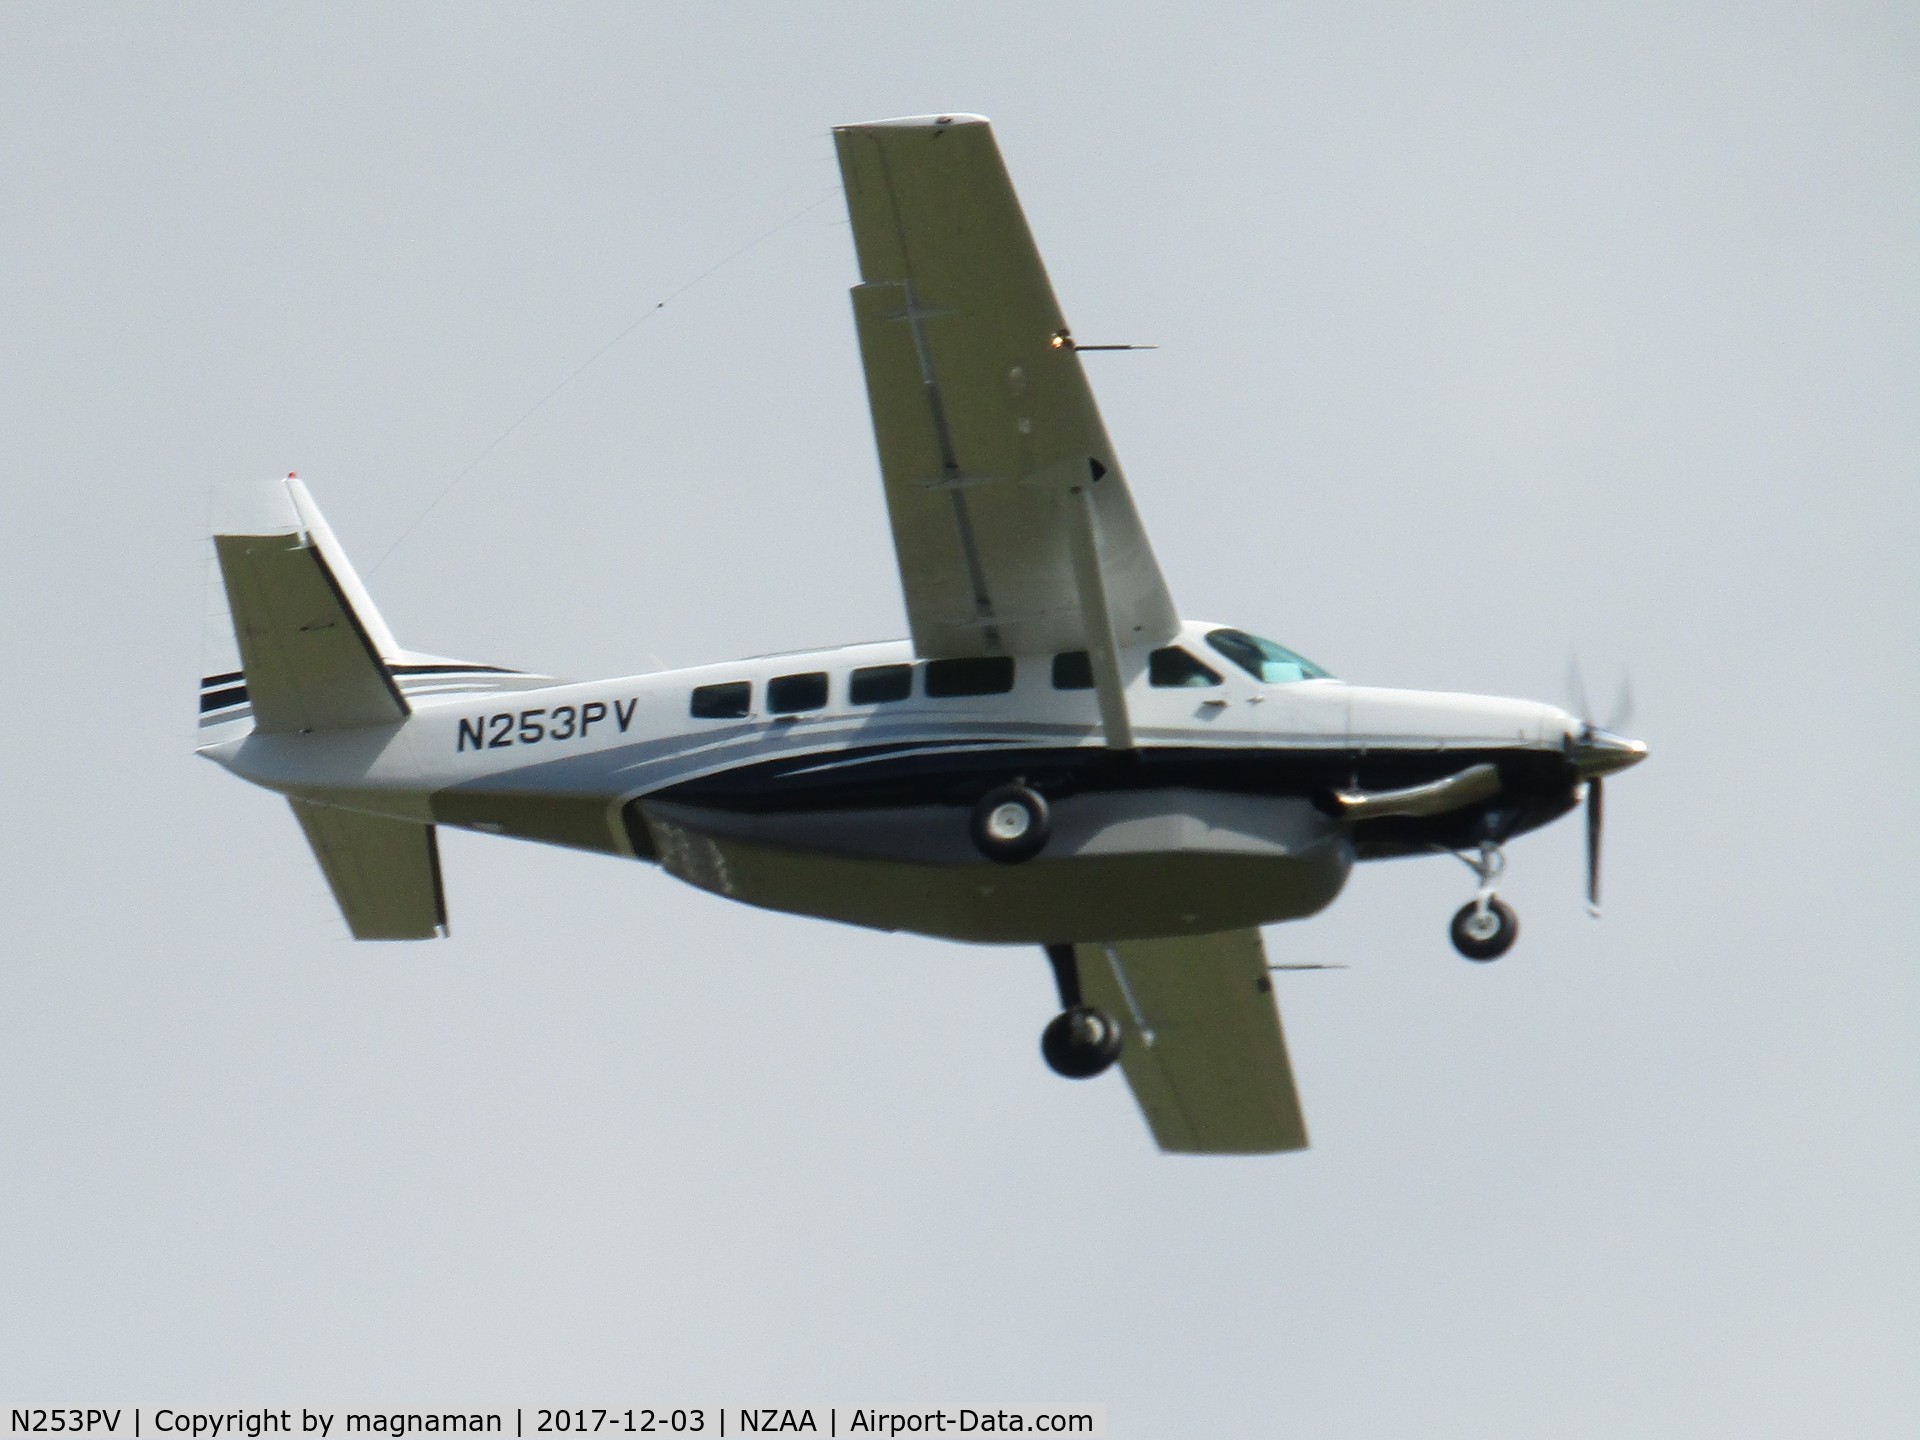 N253PV, 2017 Cessna 208 Caravan C/N 20800605, on approach to AKL this PM